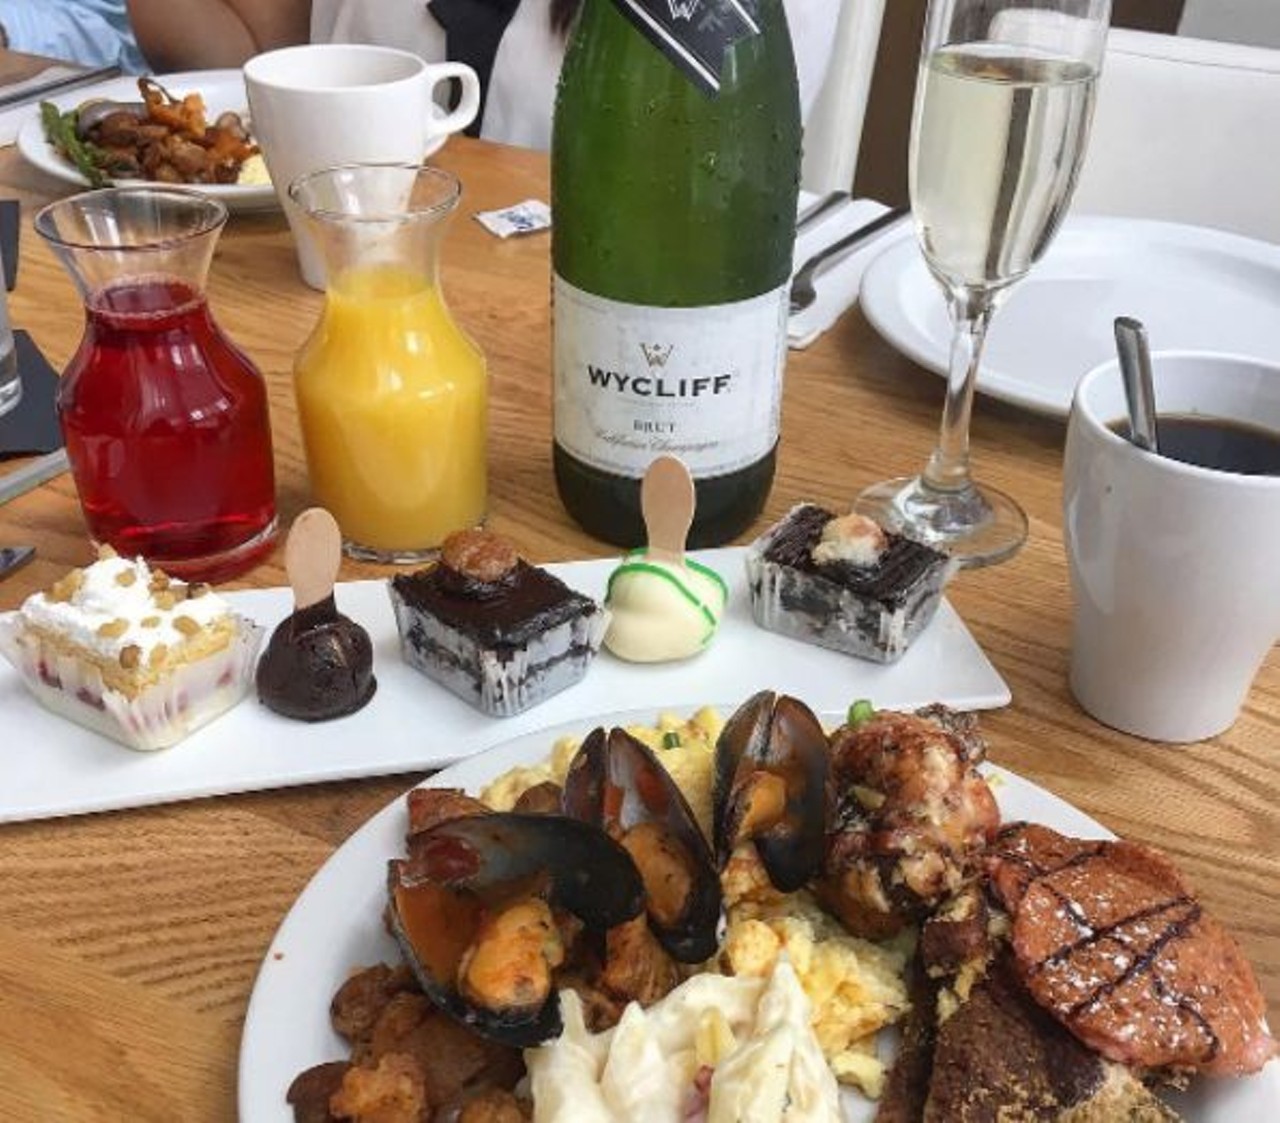 Kasa Restaurant & Bar 
Get the $32 brunch package at this minimalist restaurant on Sundays 11 a.m-4 p.m. and enjoy as many mimosas as you can drink.
183 S. Orange Ave., 407-985-5272
Photo via shamoozie /Instagram